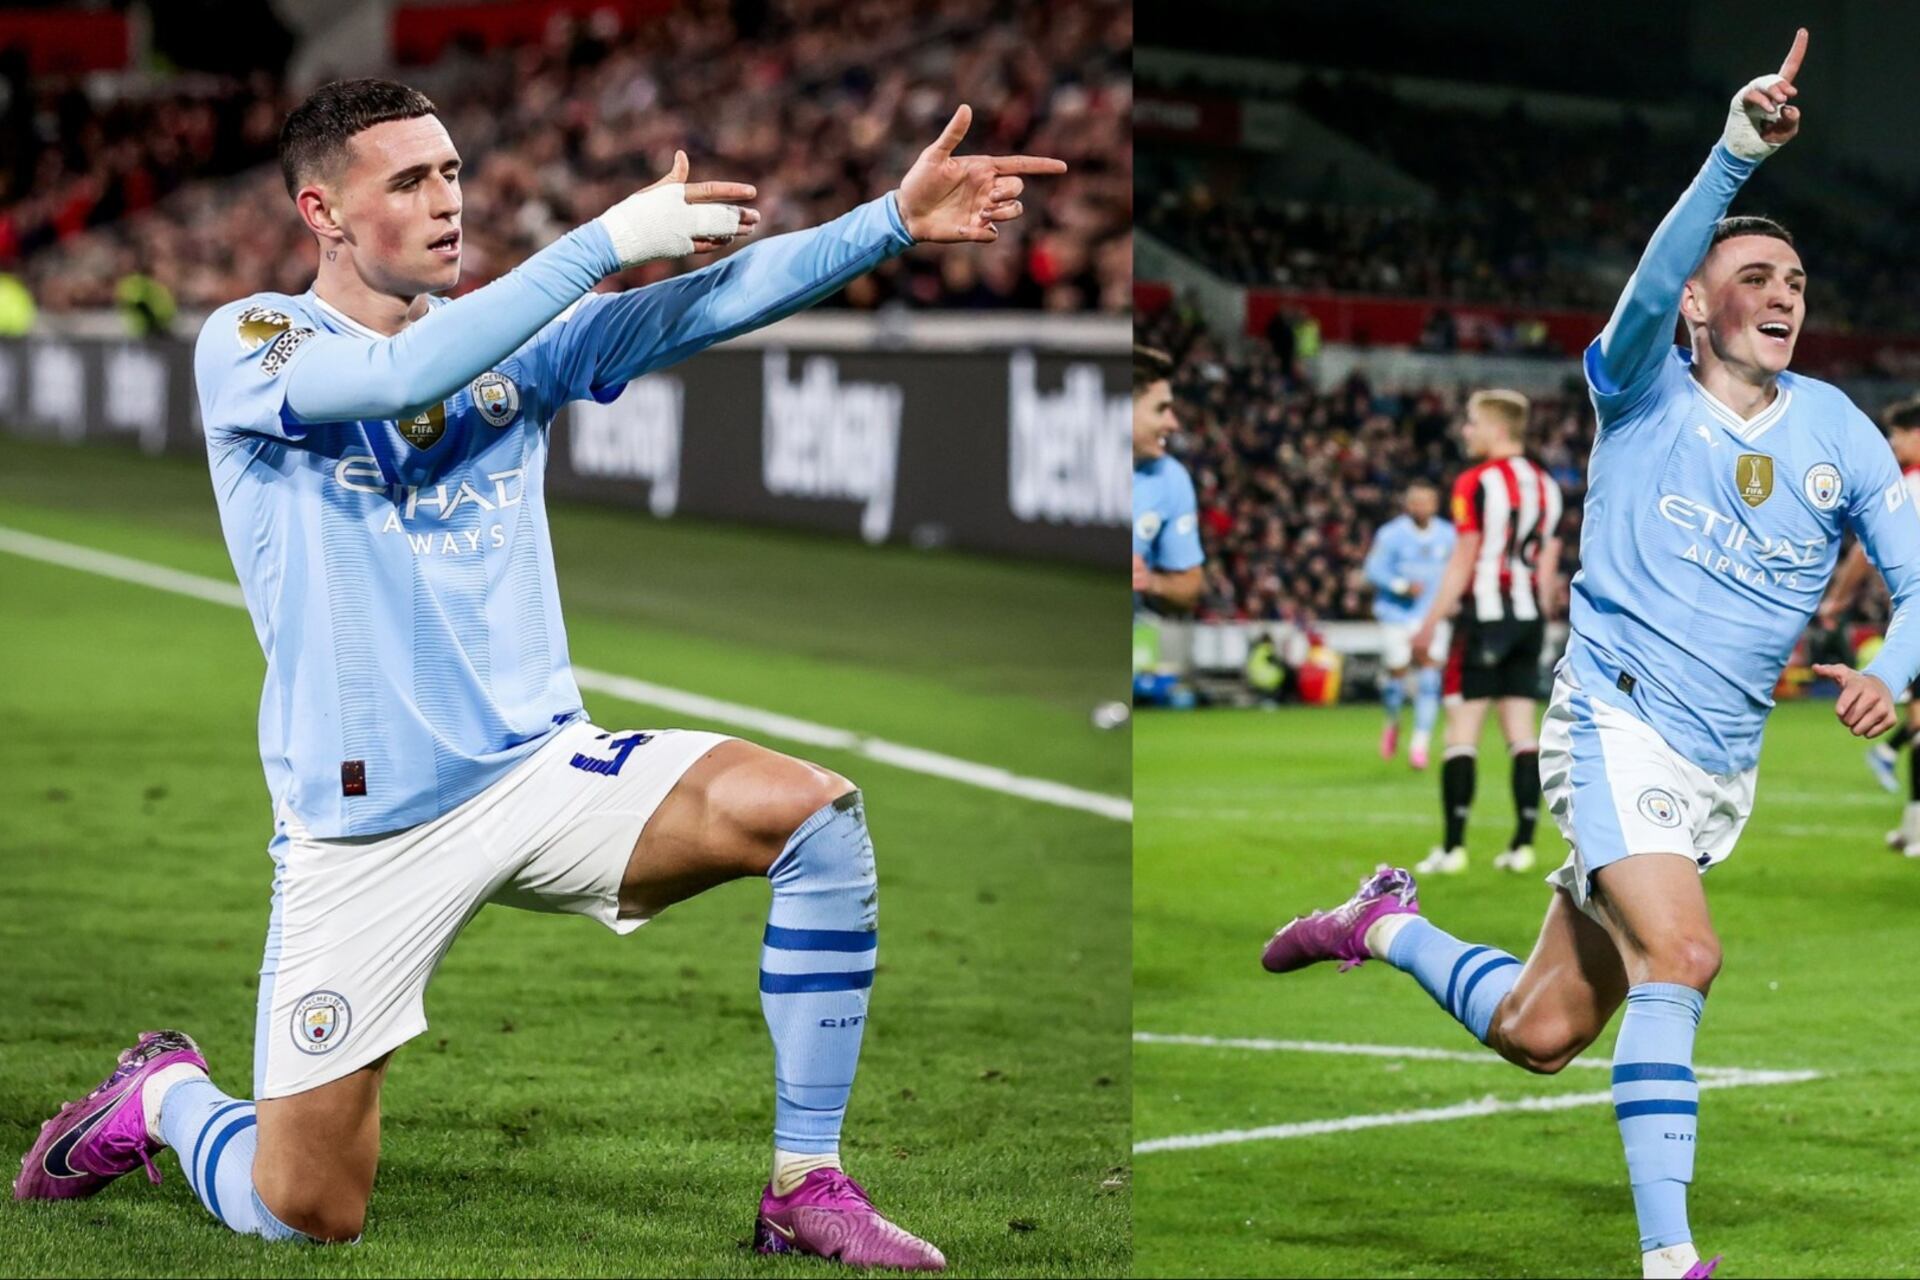 Starboy! Phil Foden scores a hattrick to give Man City a 3-1 win vs Brentford